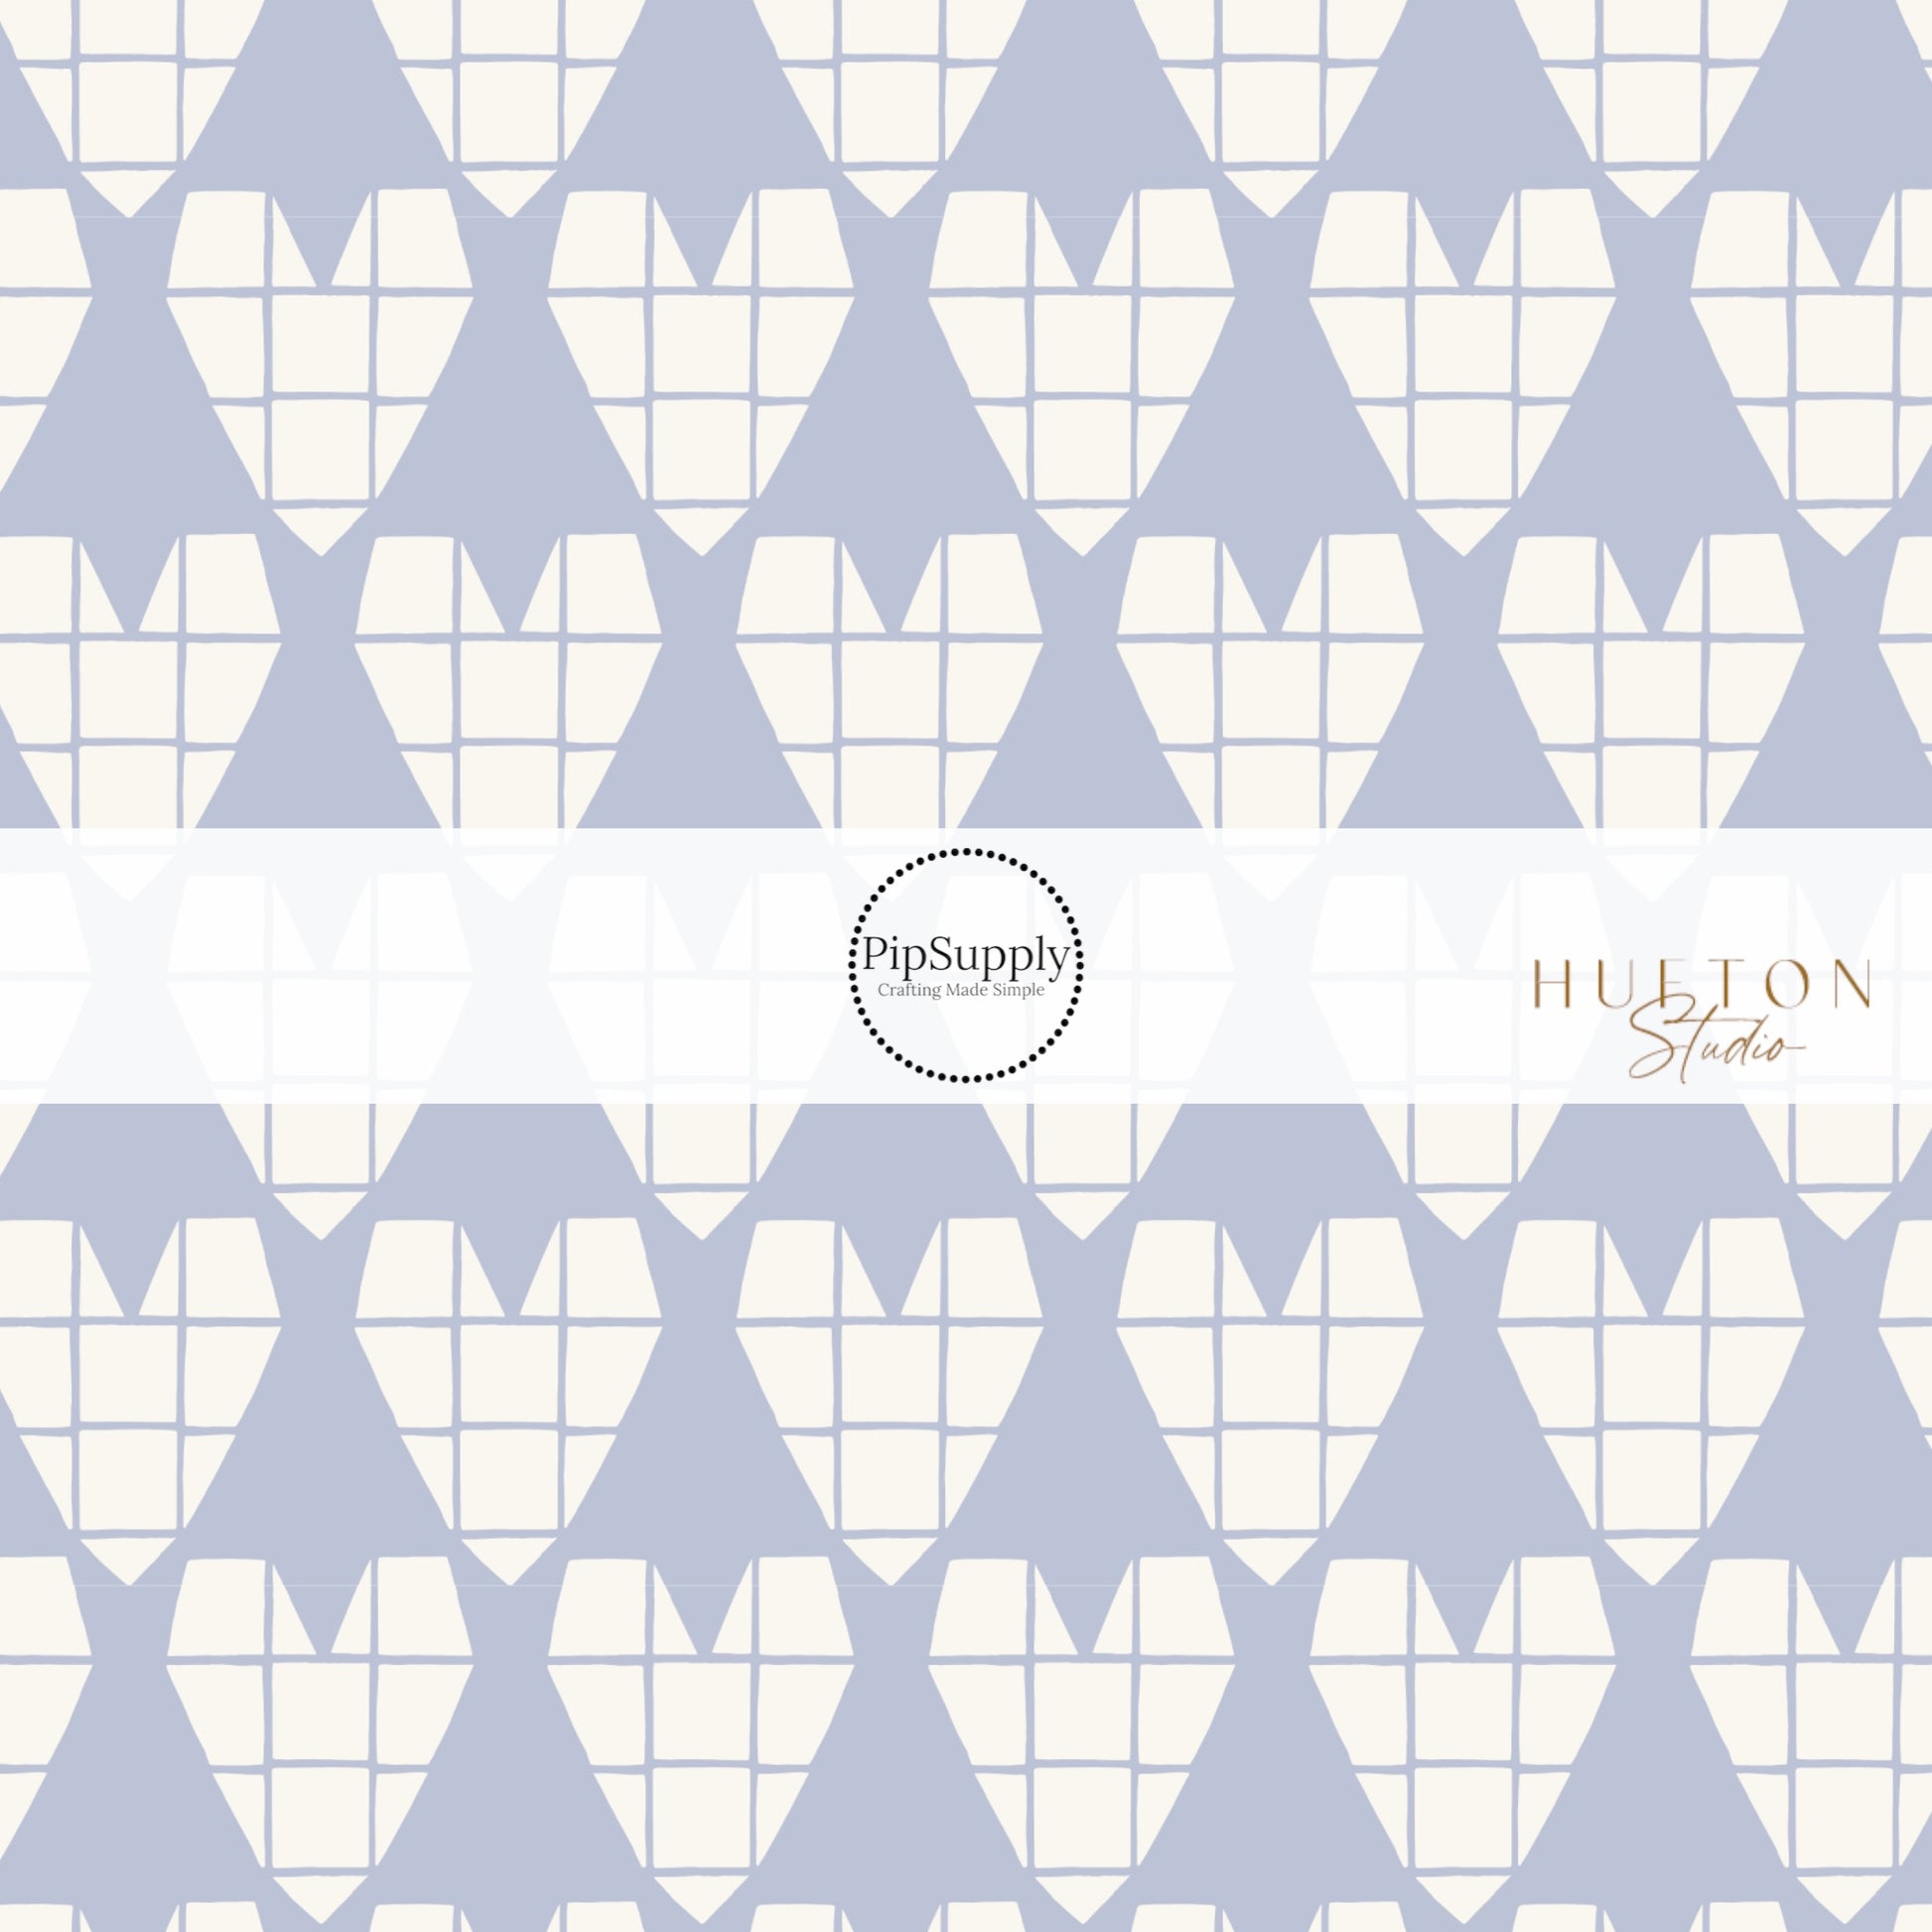 Light Blue Fabric by the yard with Cream Grid heart design